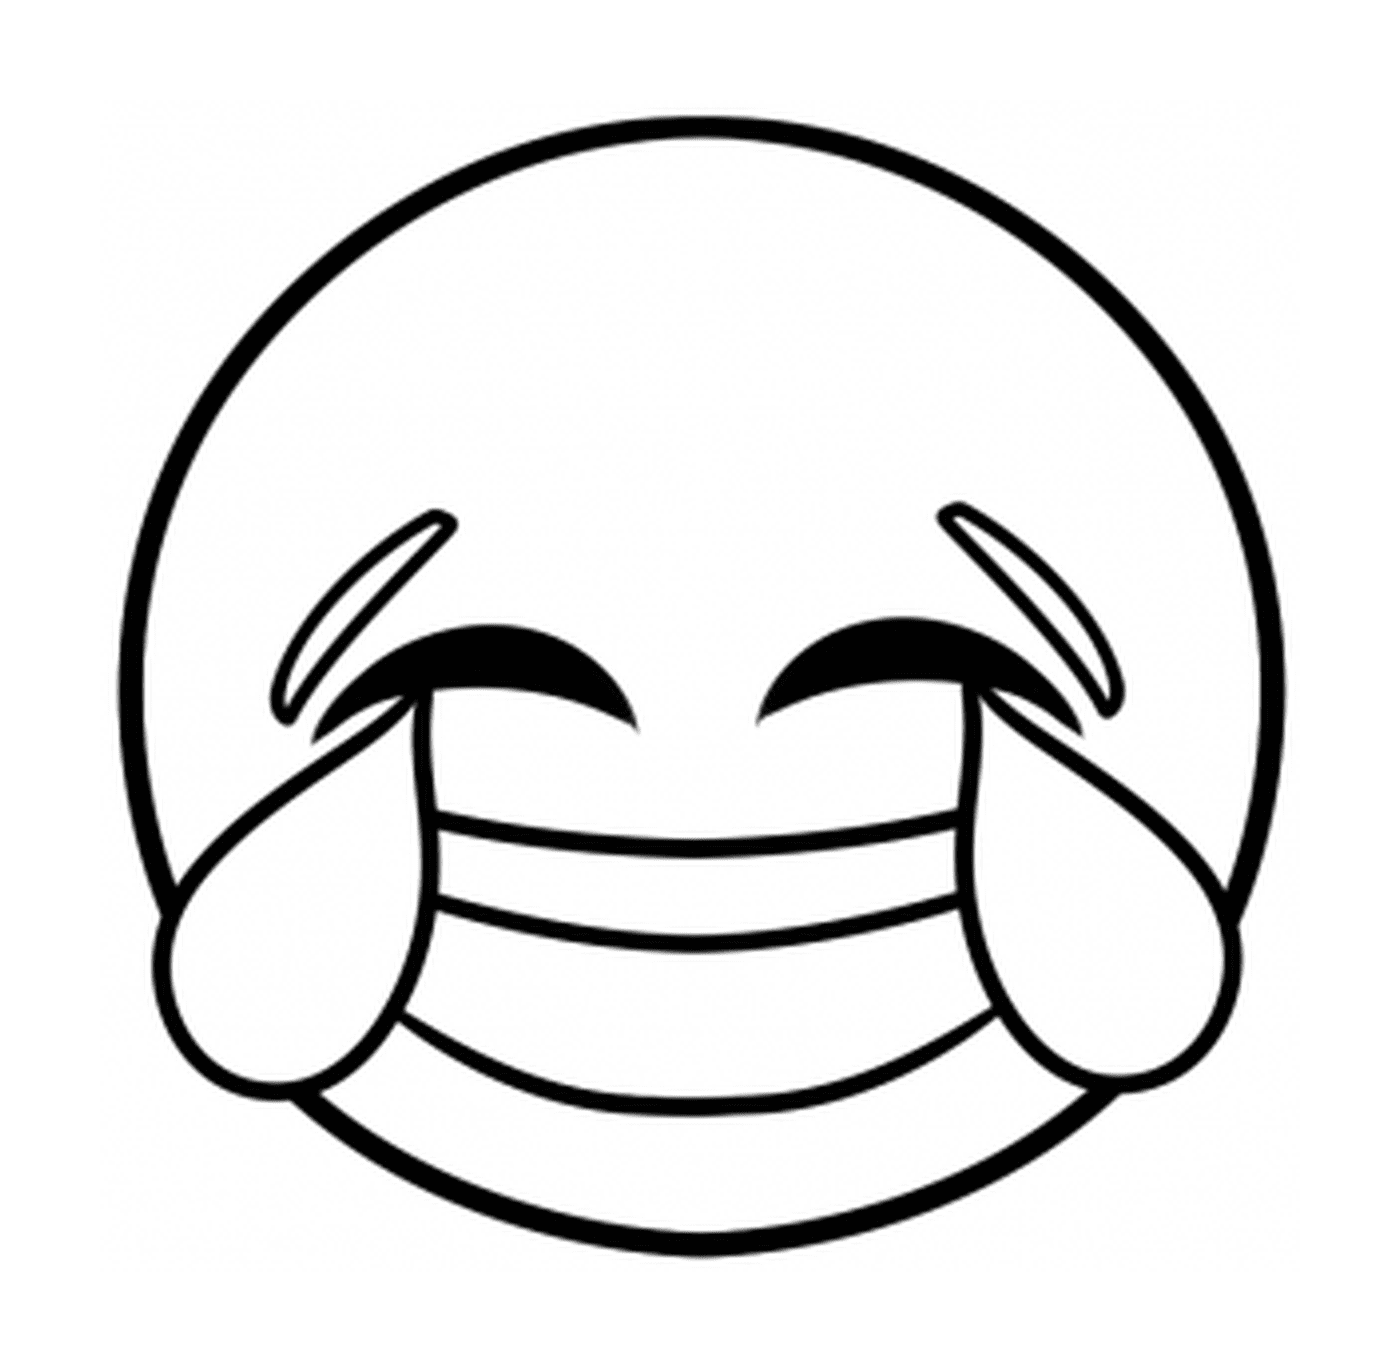  A laughing emoticon 